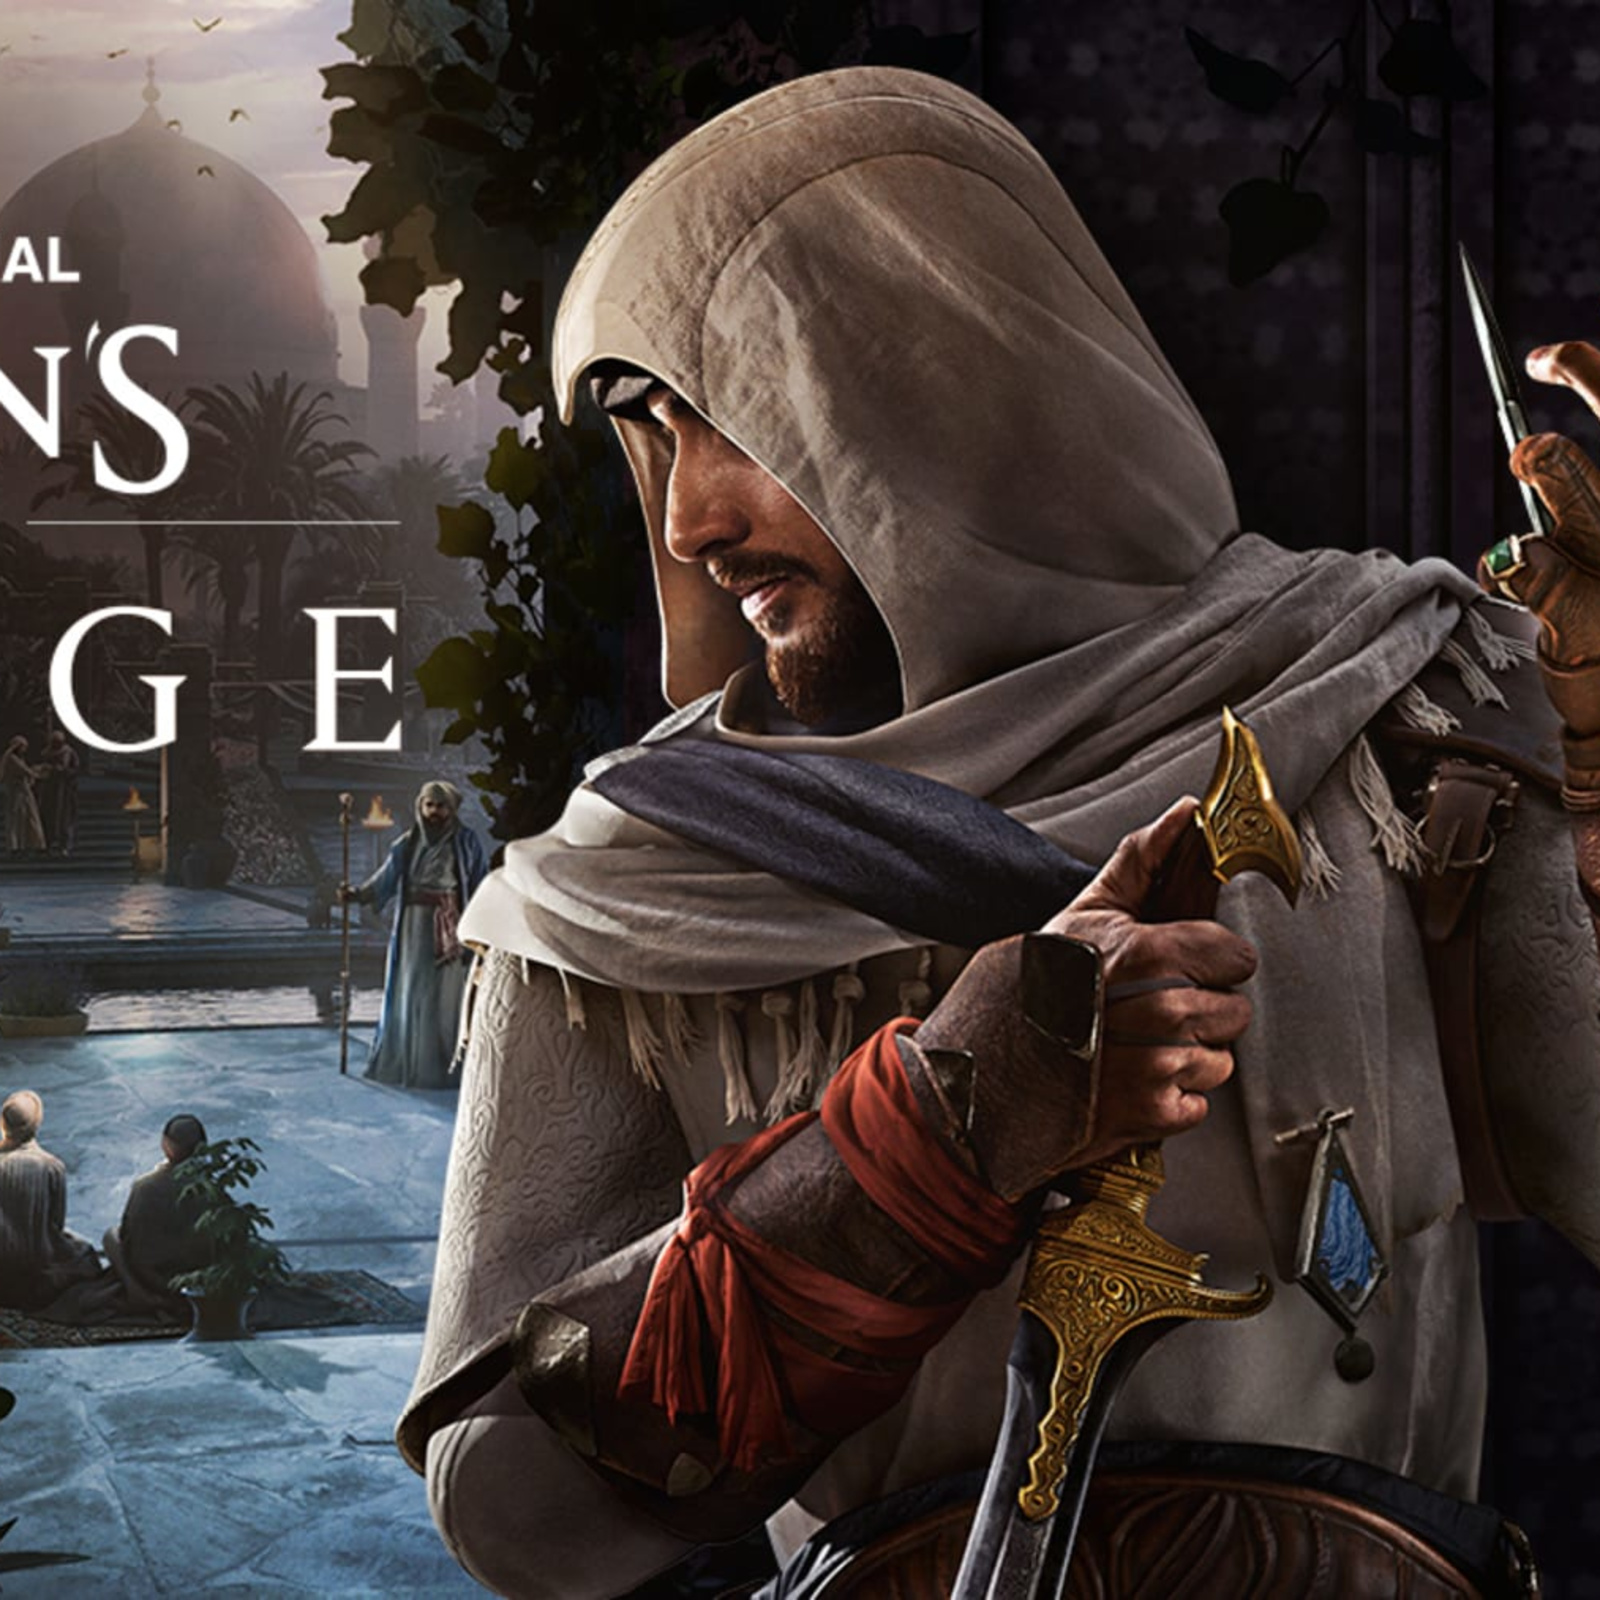 Assassin's Creed Mirage Review: Gameplay Impressions and Videos, News,  Scores, Highlights, Stats, and Rumors